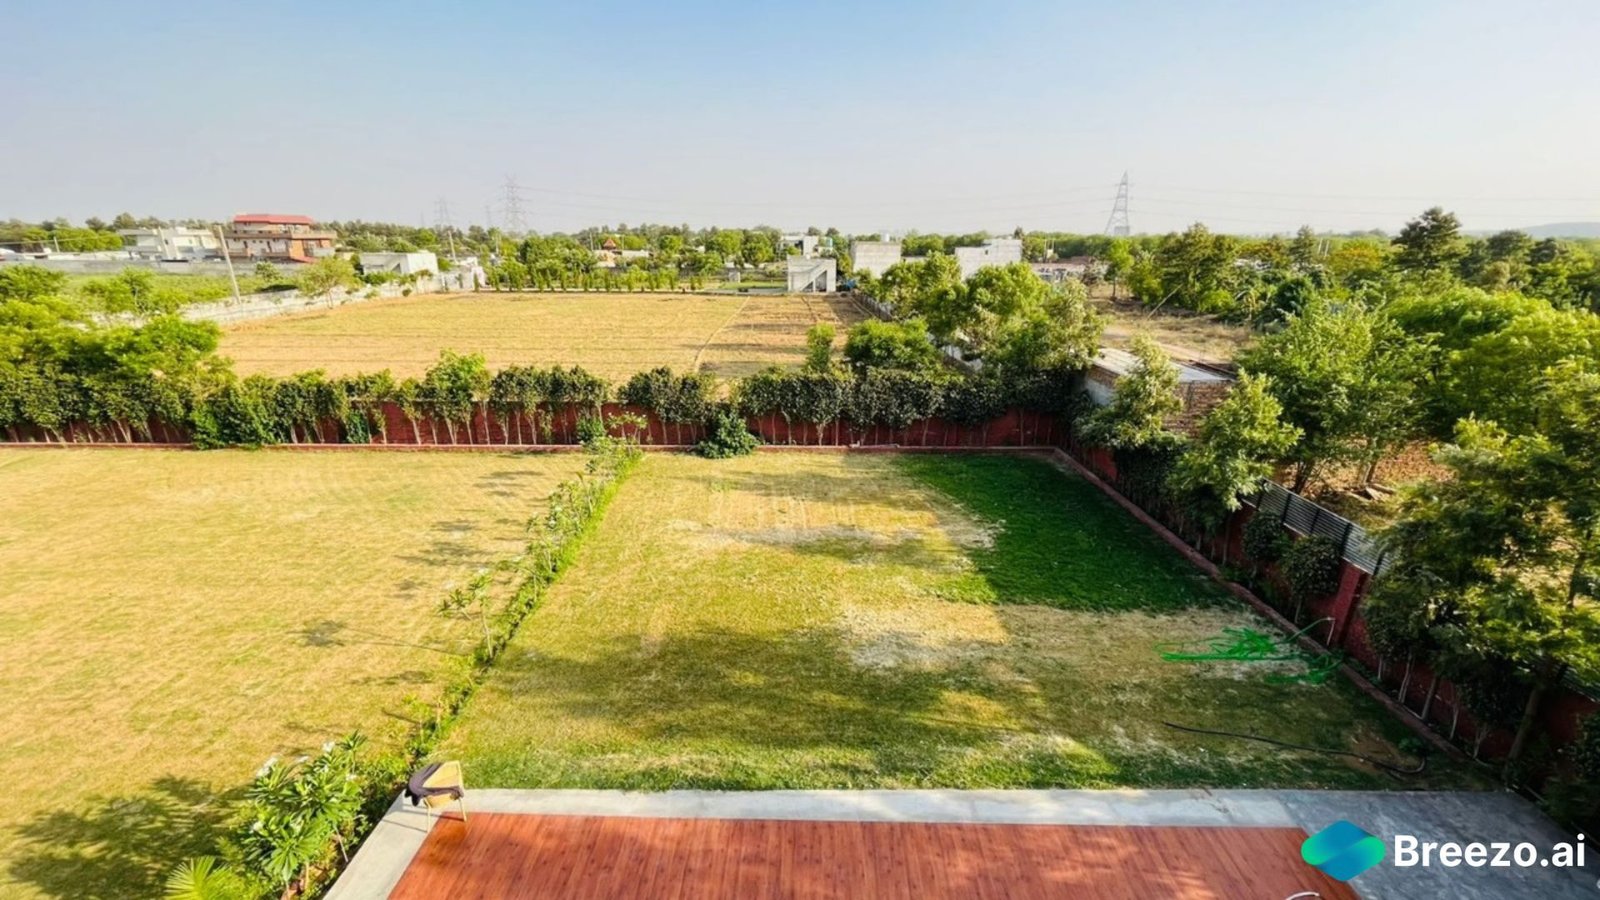 Aerial view of farmhouse for film shoots in Delhi NCR, Gurgaon, and Noida.